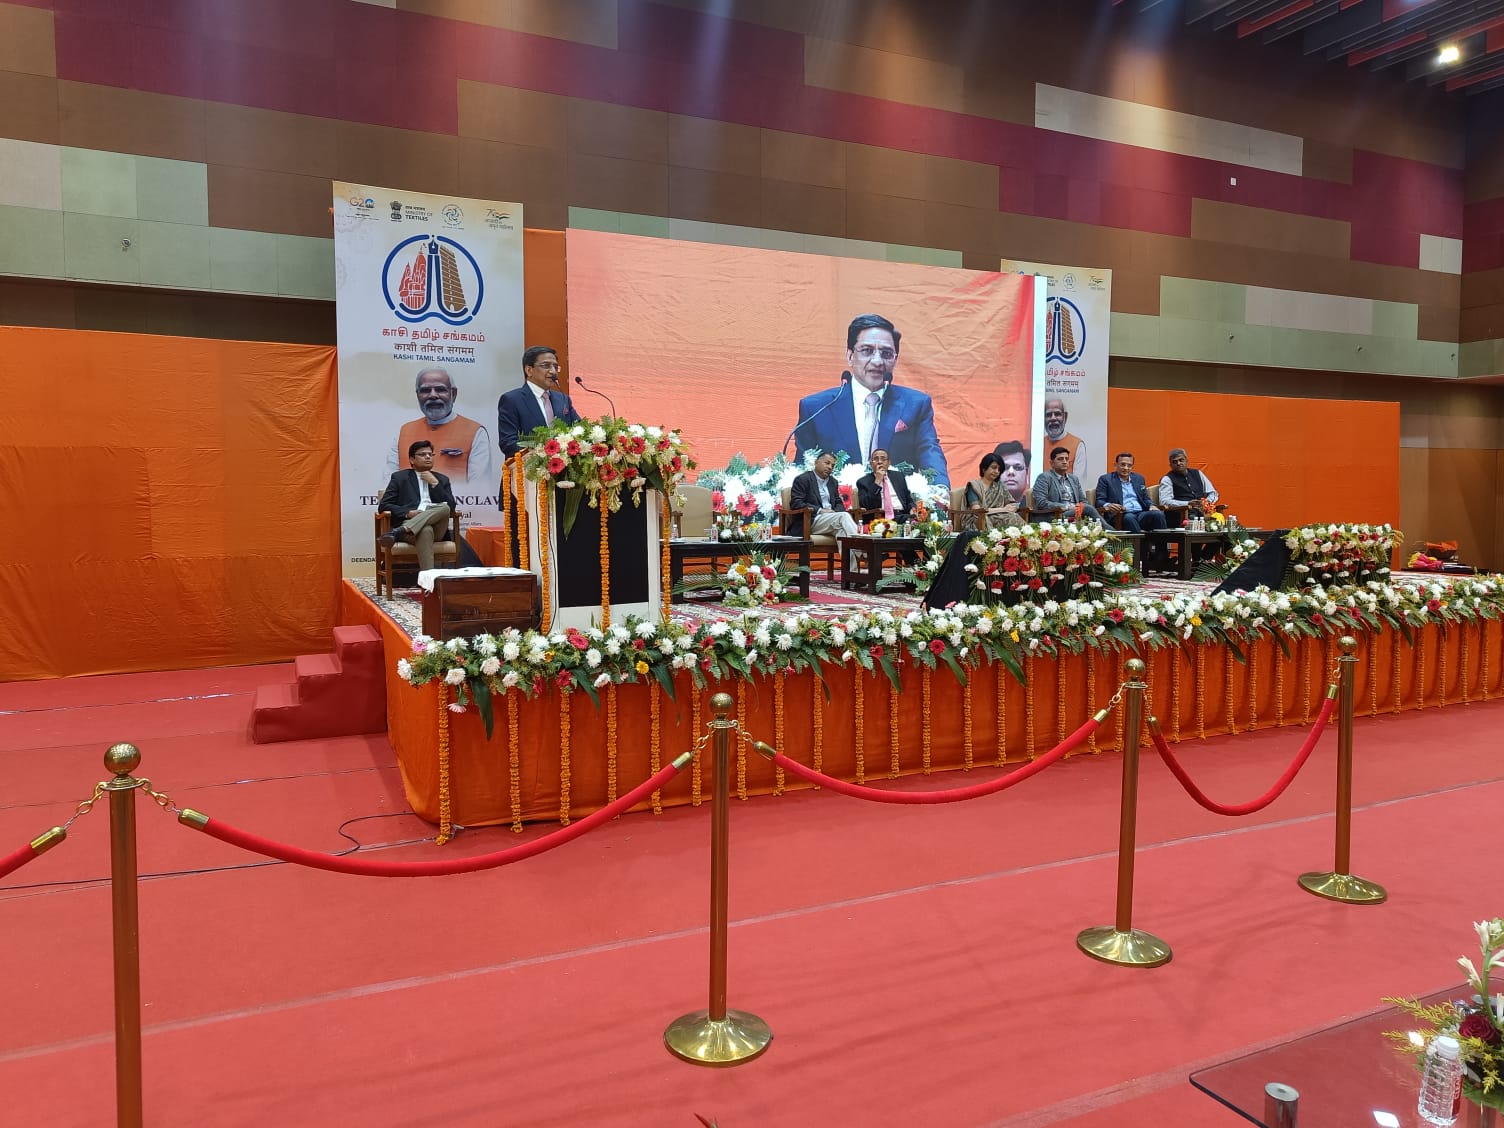 Shri Sunil Patwari, Chairman TEXPROCIL speaking at the Vision 2047 Textiles Brainstorming session with industry organised by MoT during the two day Textile Conclave coinciding with the event Kashi Tamil Samagam at Varanasi, Uttar Pradesh